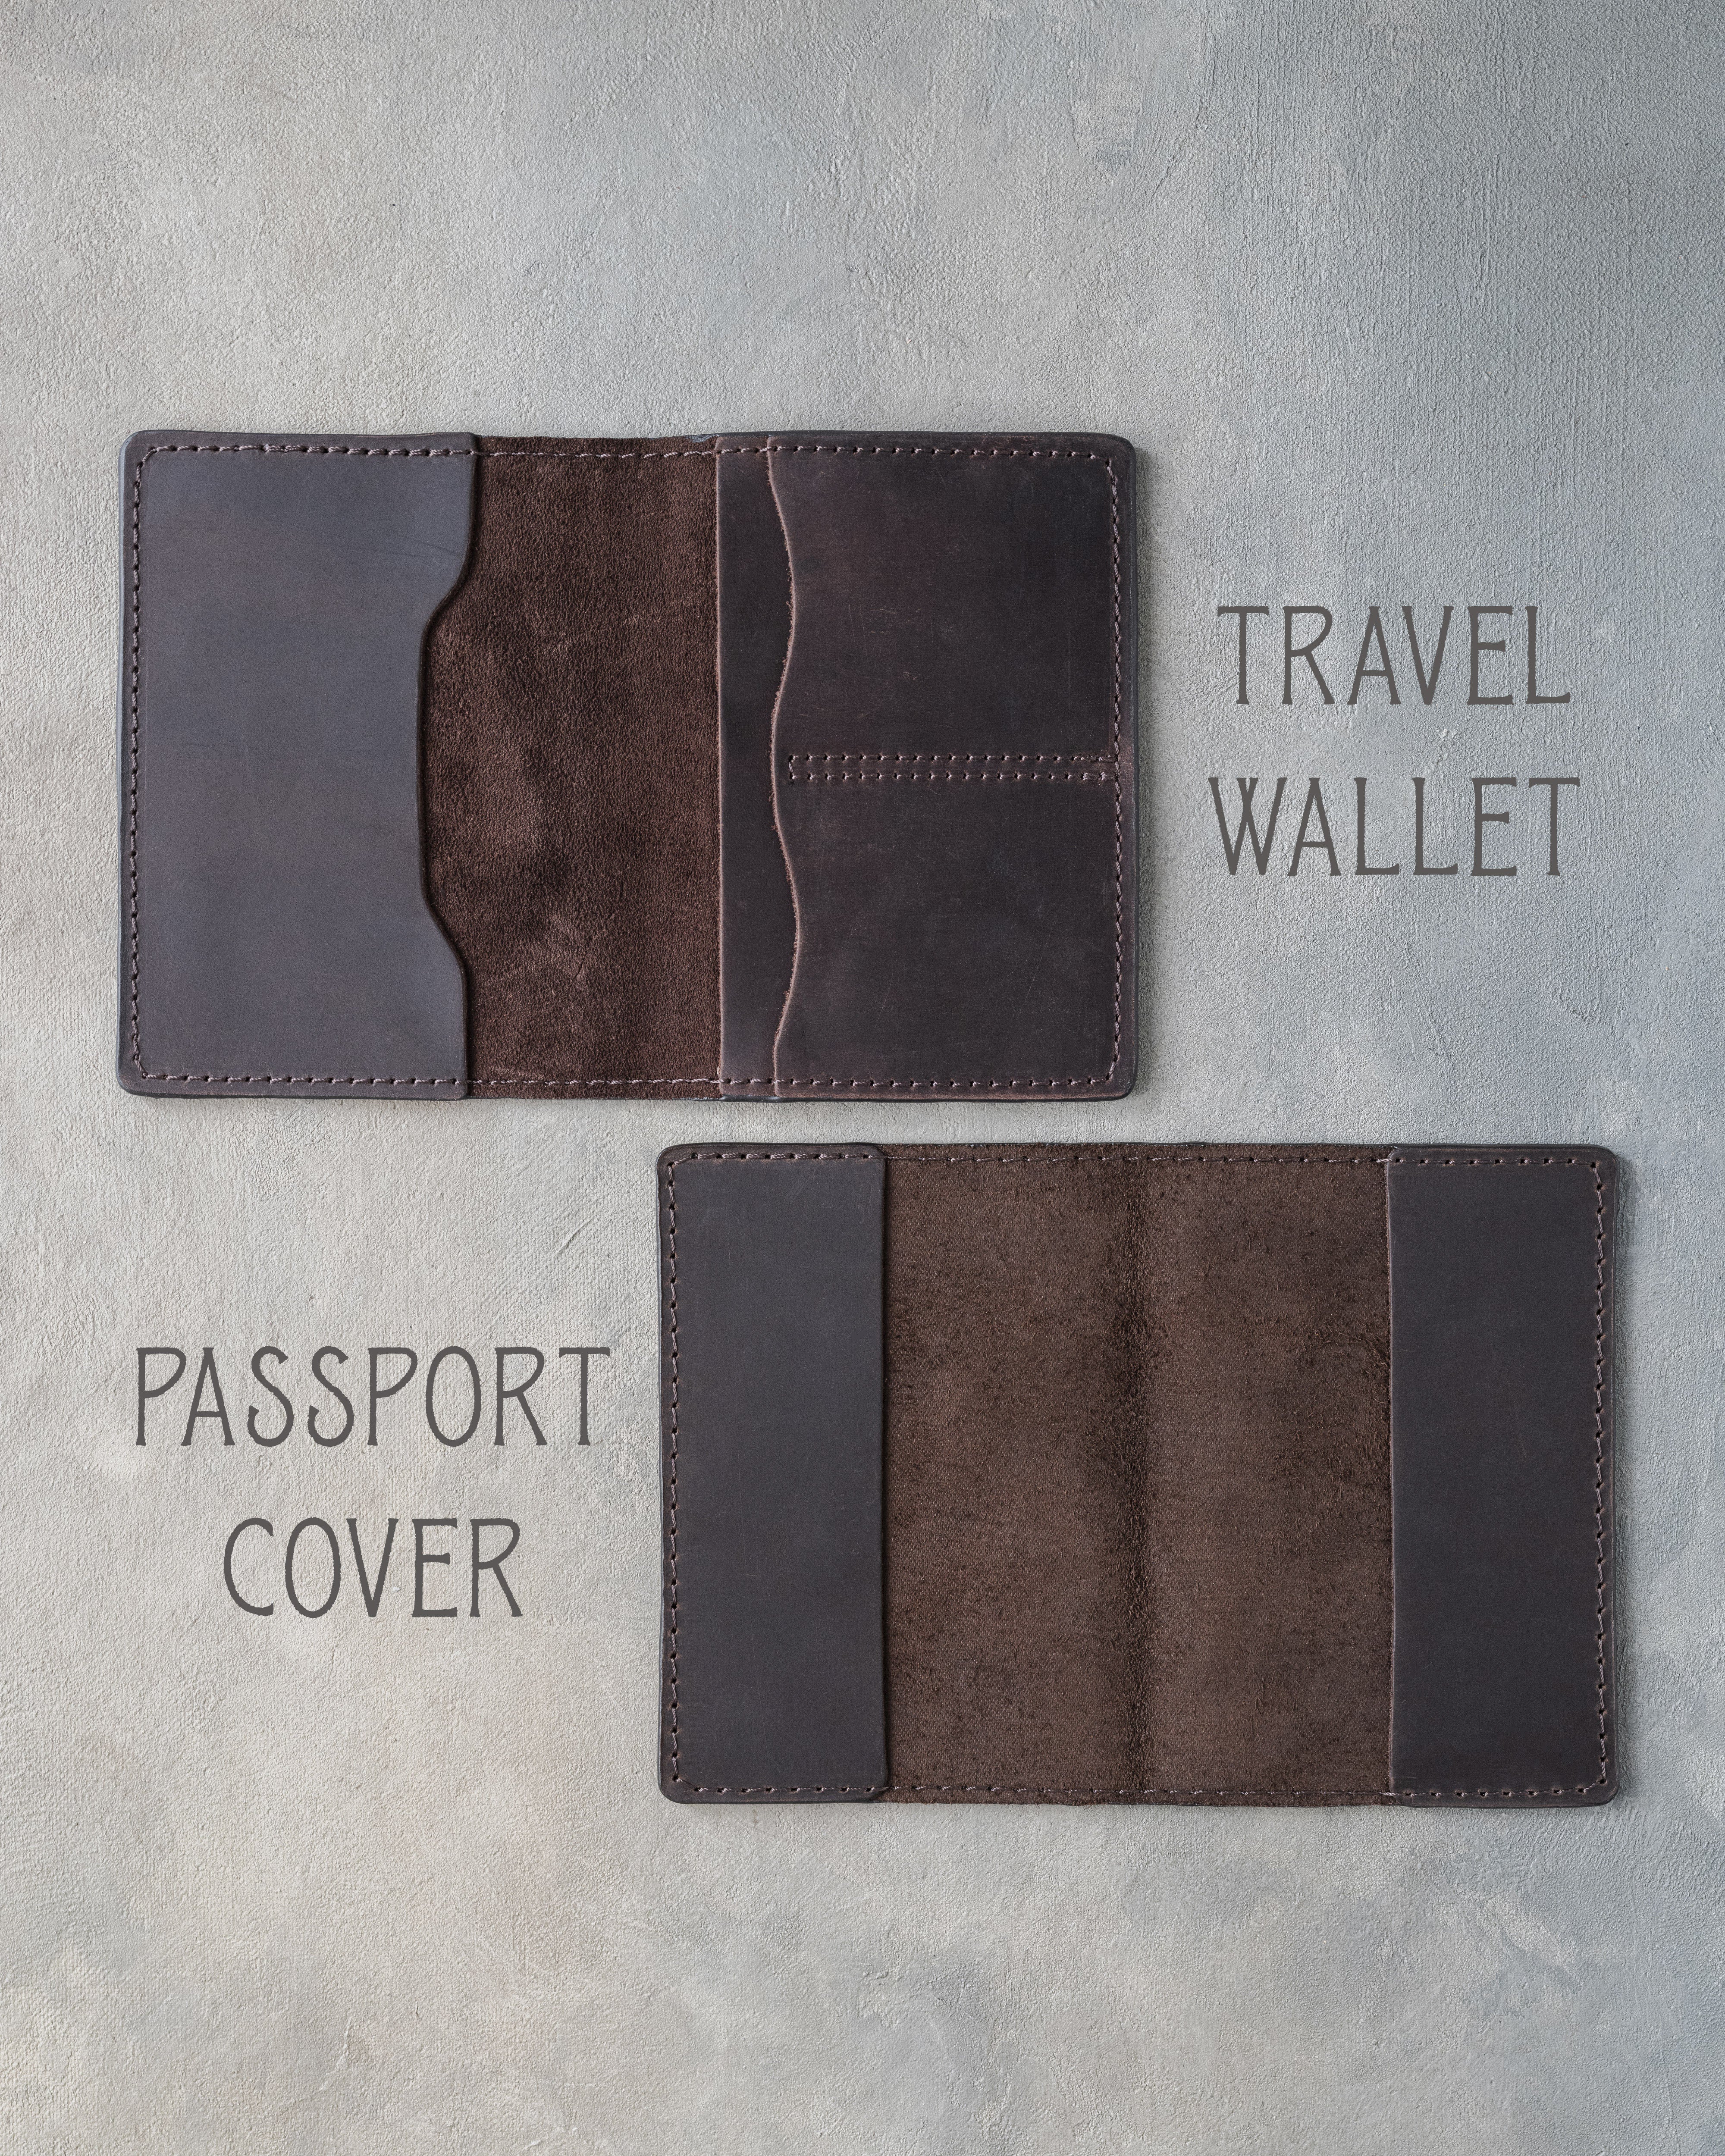 Personalized Passport Cover / Travel Wallet In Indian Summer Leather